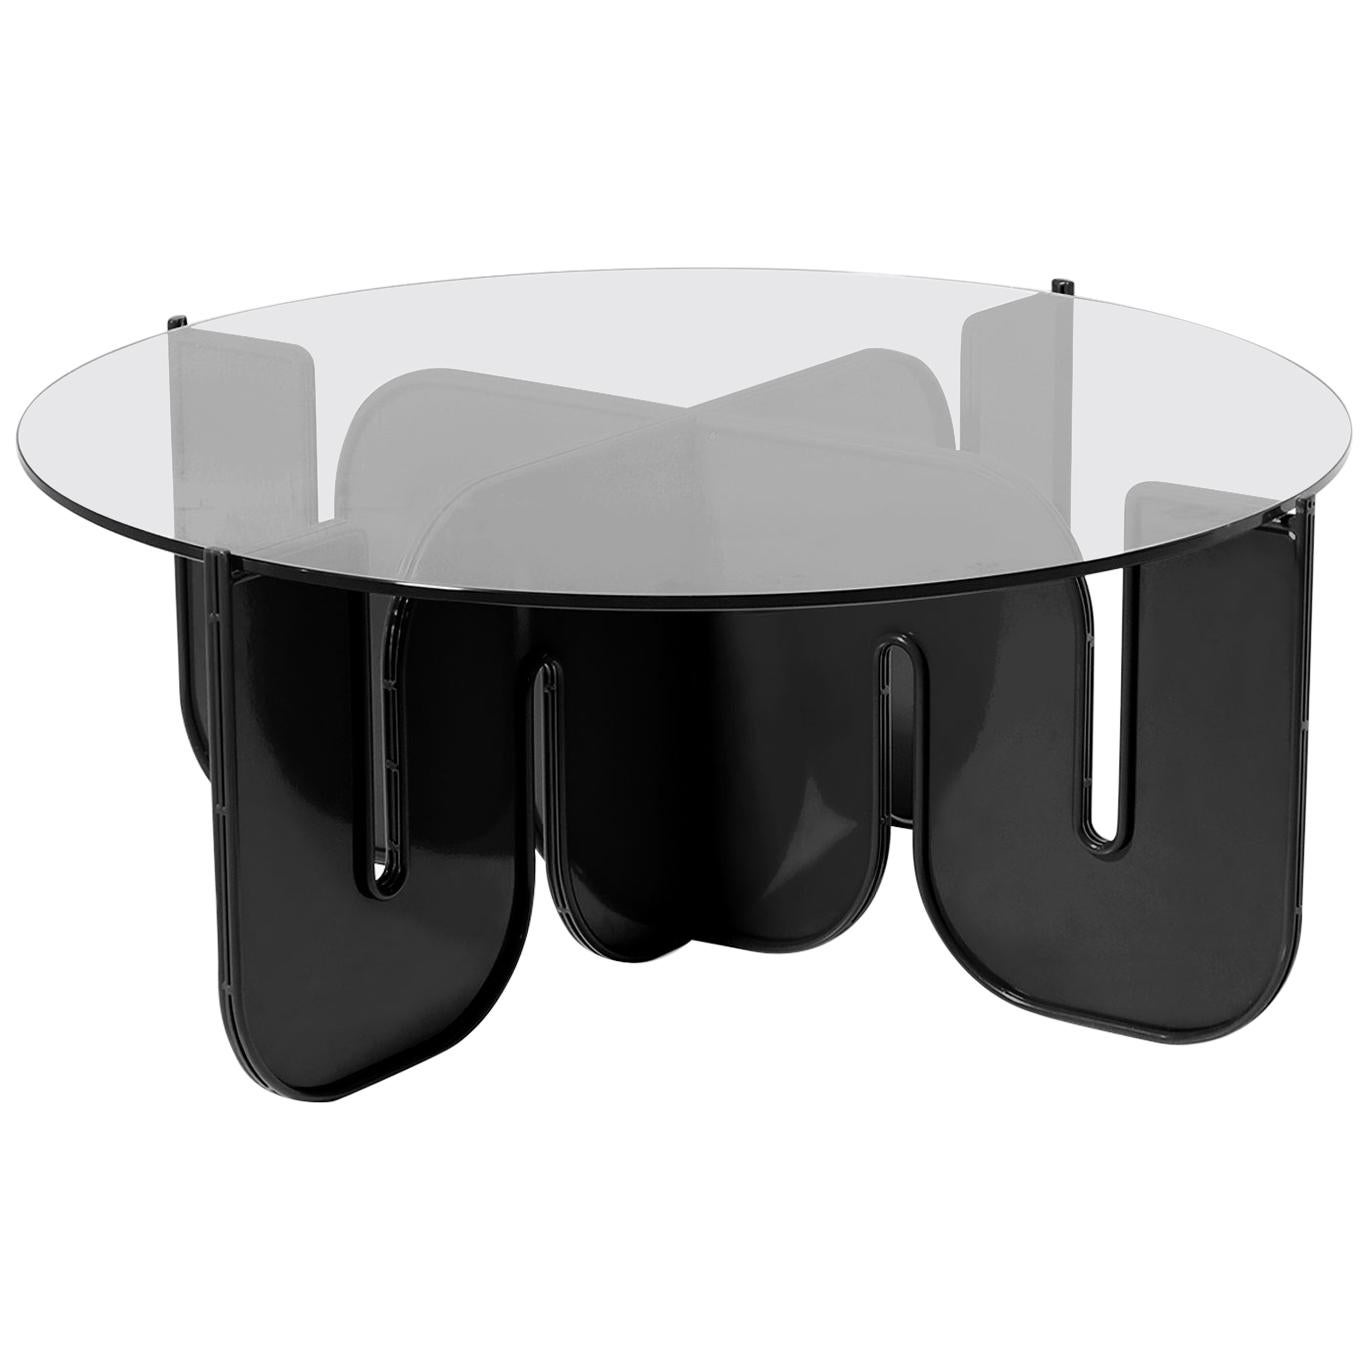 Modern Coffee Table, Minimalist Flat Pack Center Table in Black, Clear Glass